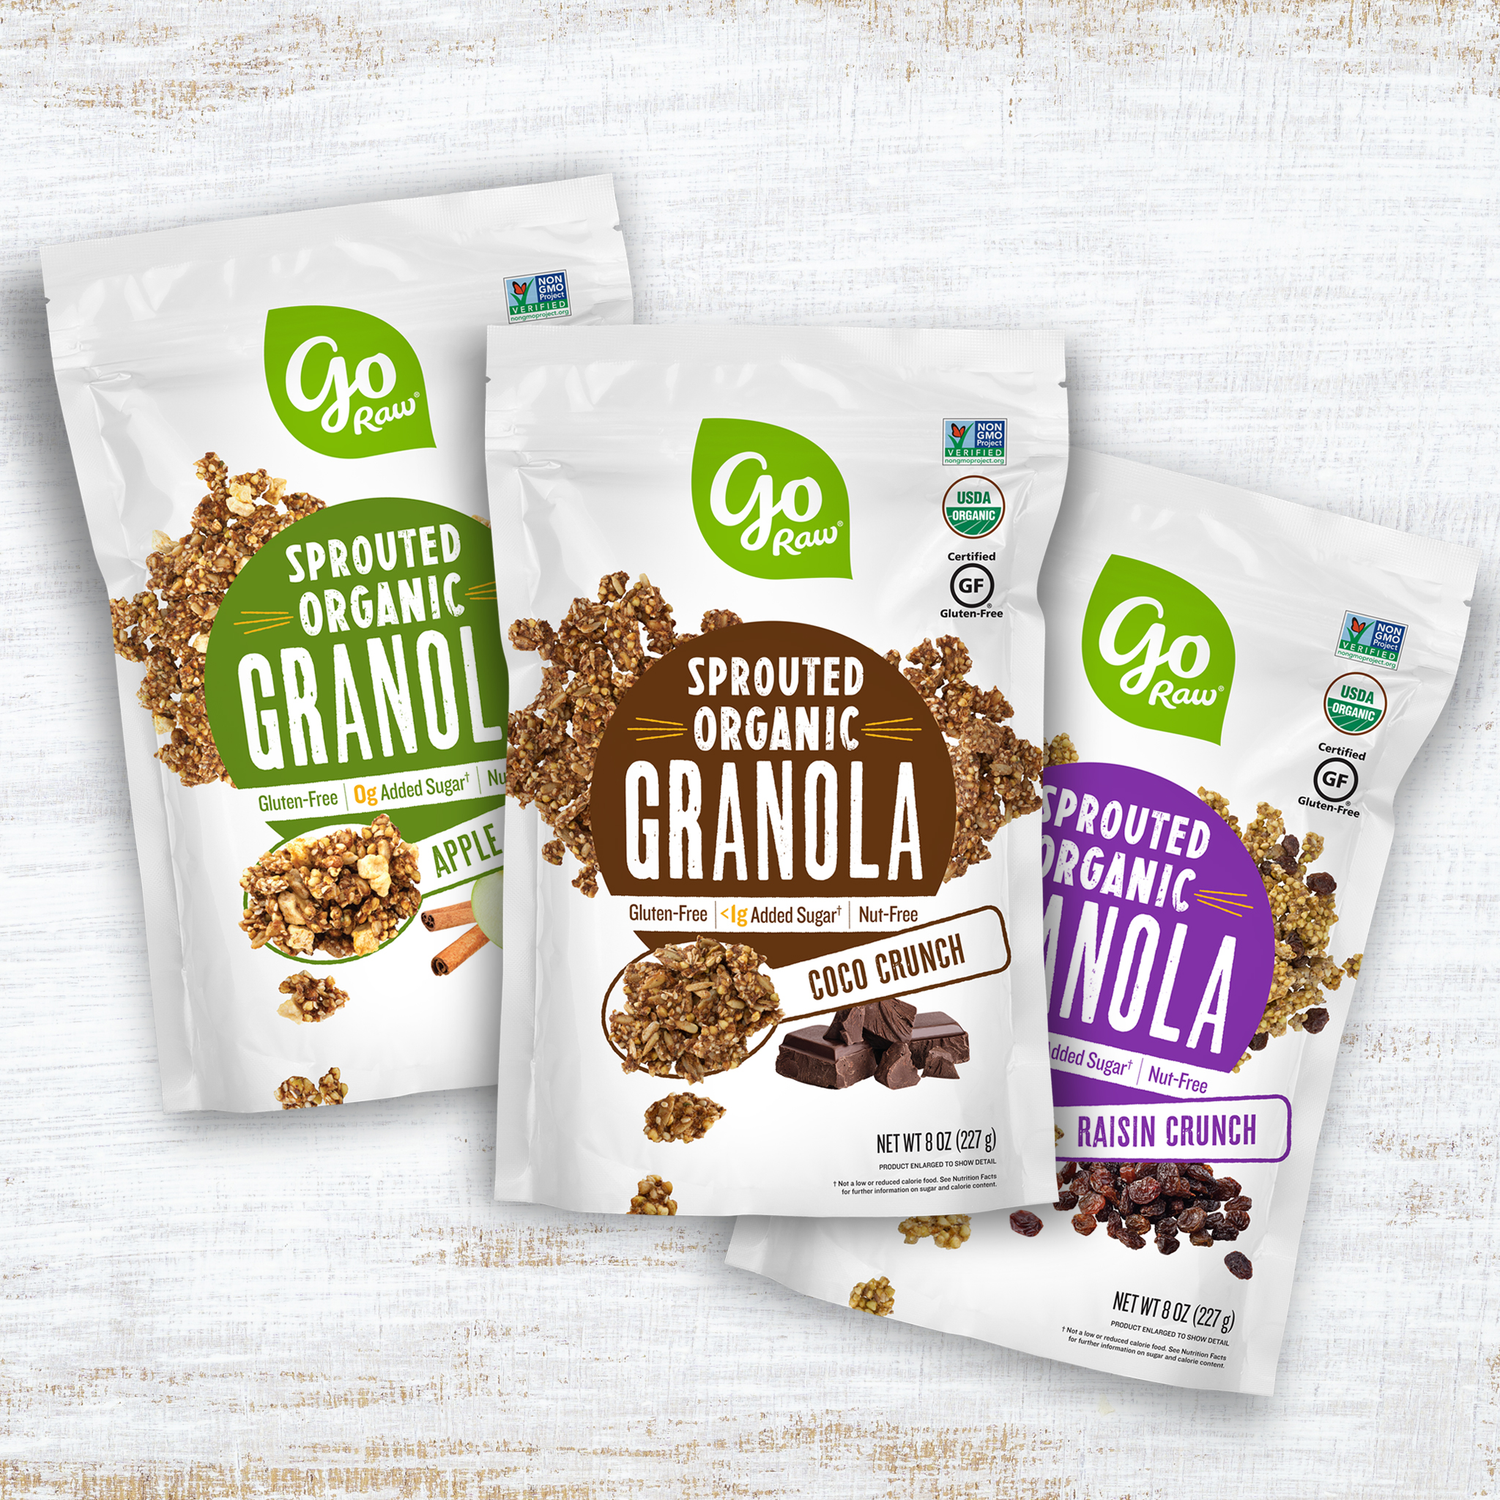 Go Raw Sprouted Seed Gluten-Free Nut-Free Granola